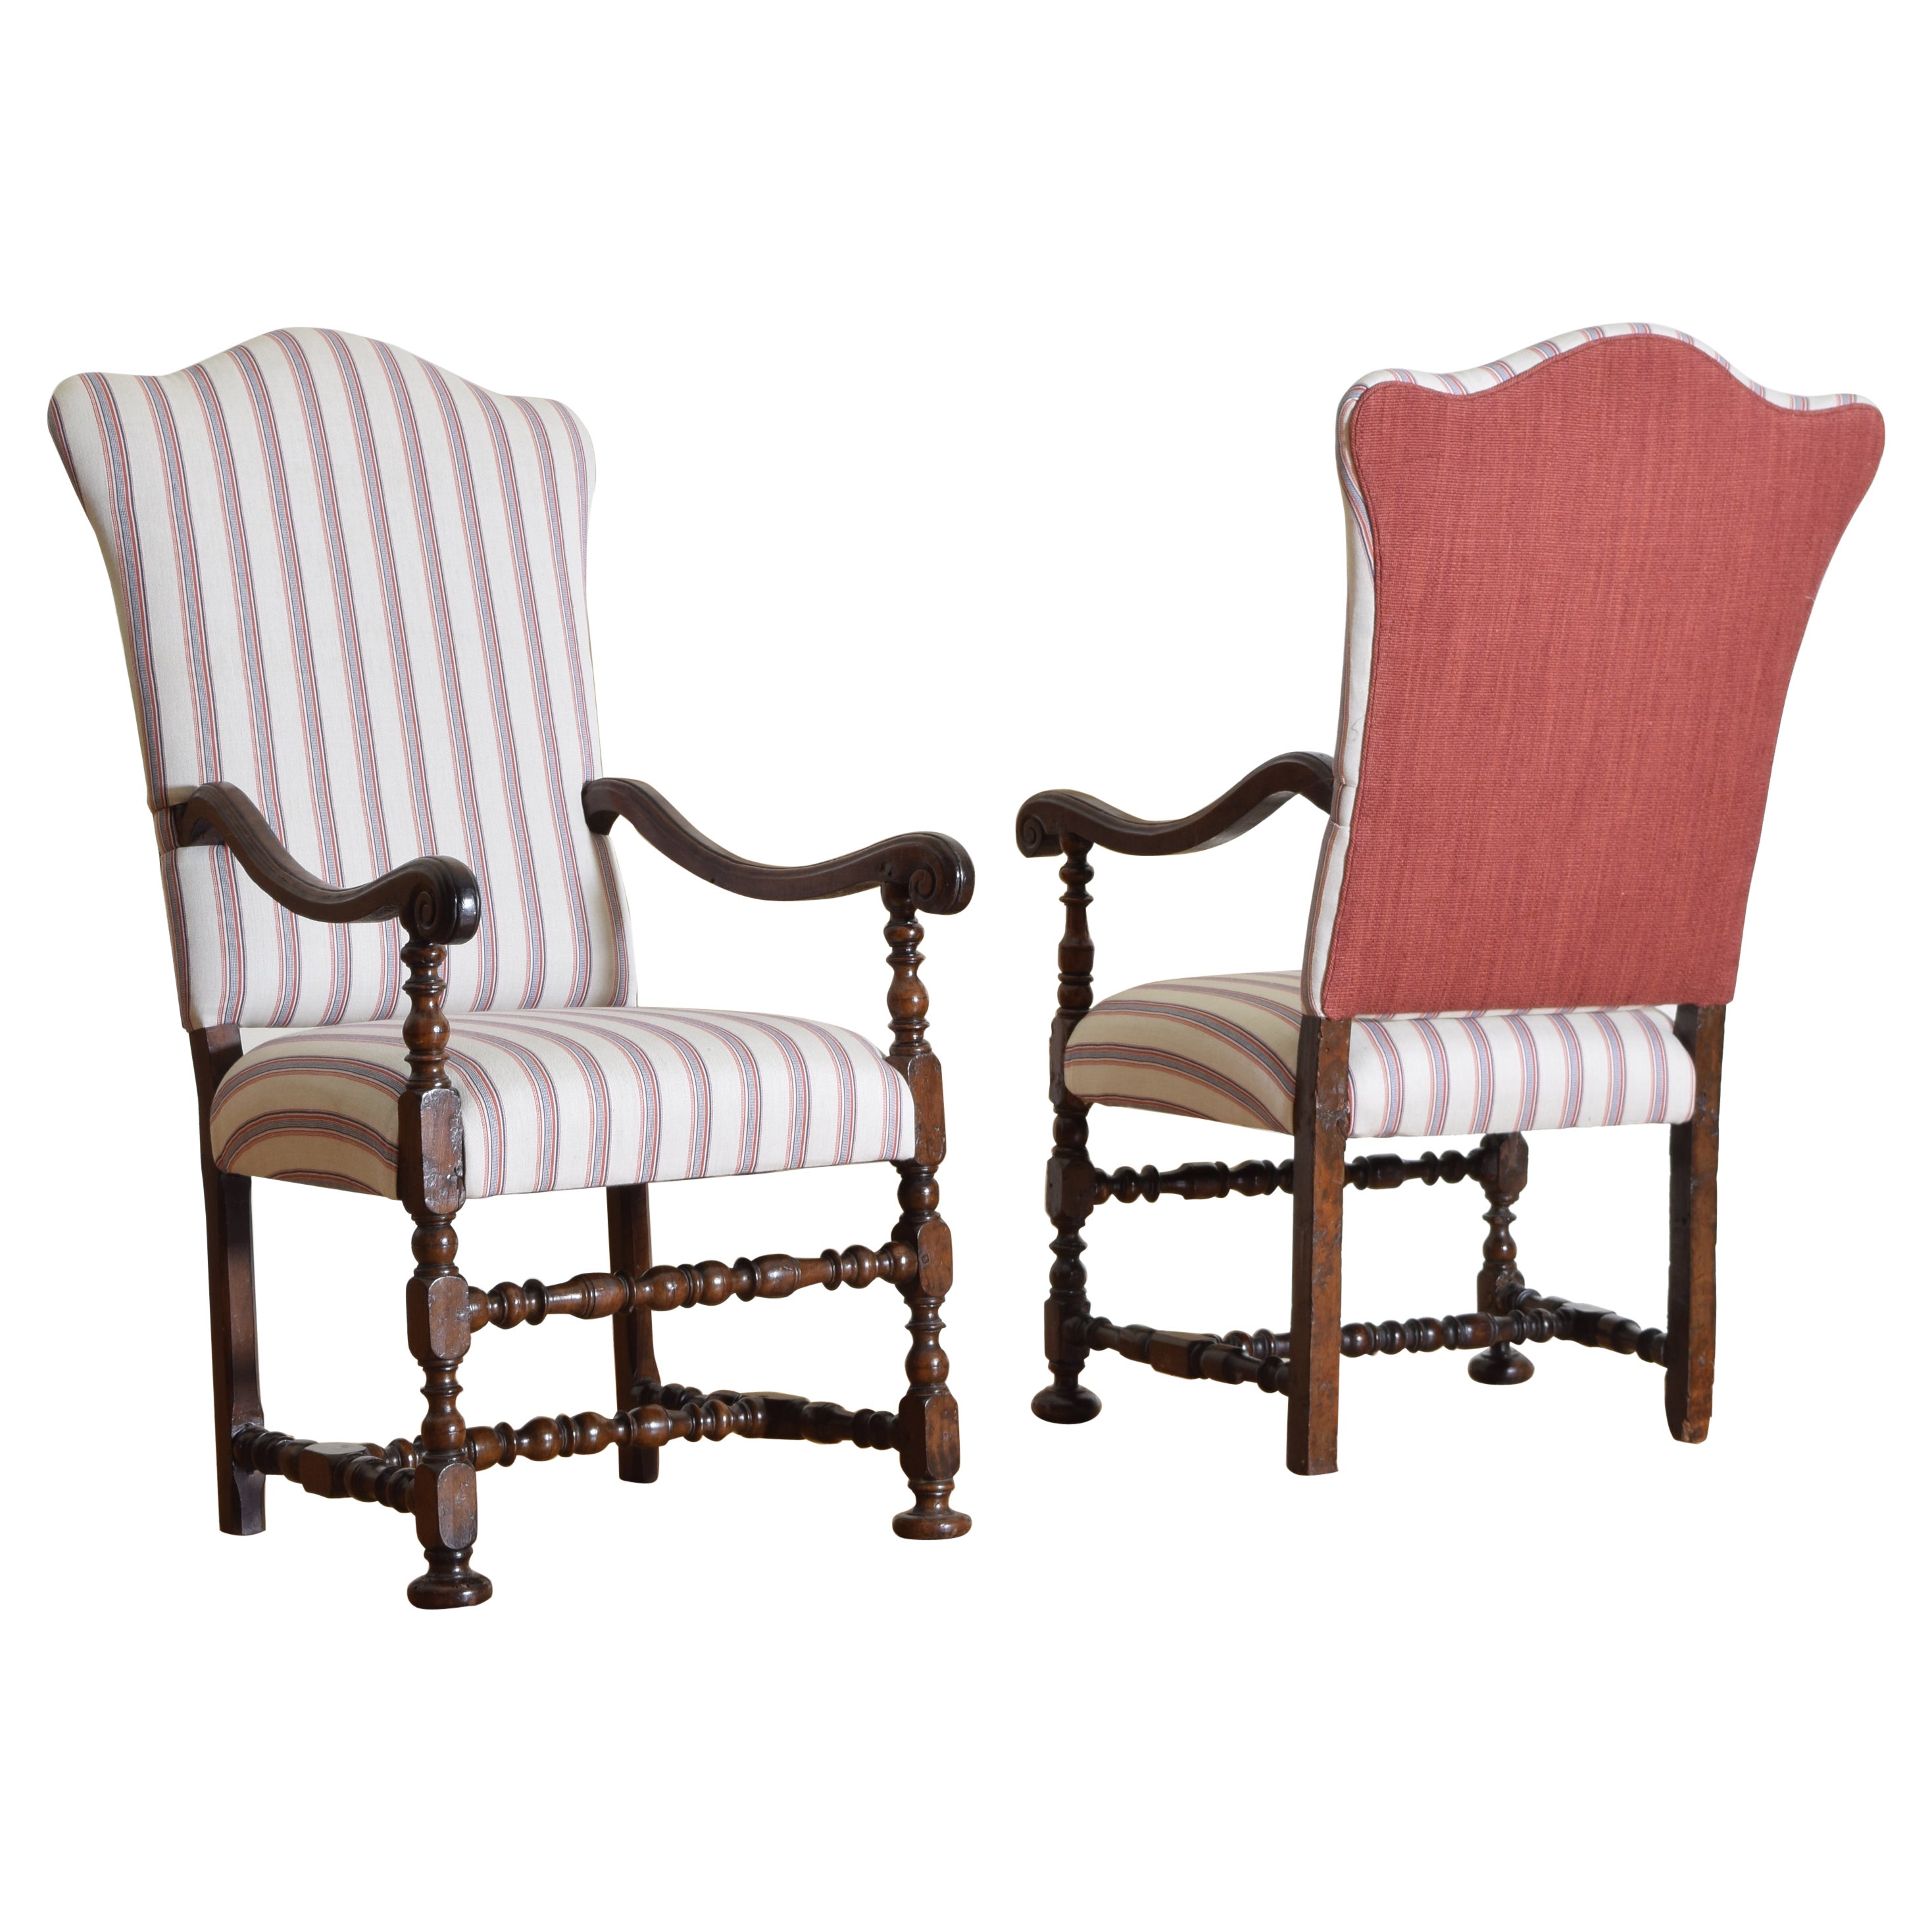 Italian, Emiliana, Louis XIII Period Pair of Walnut and Upholstered Armchairs